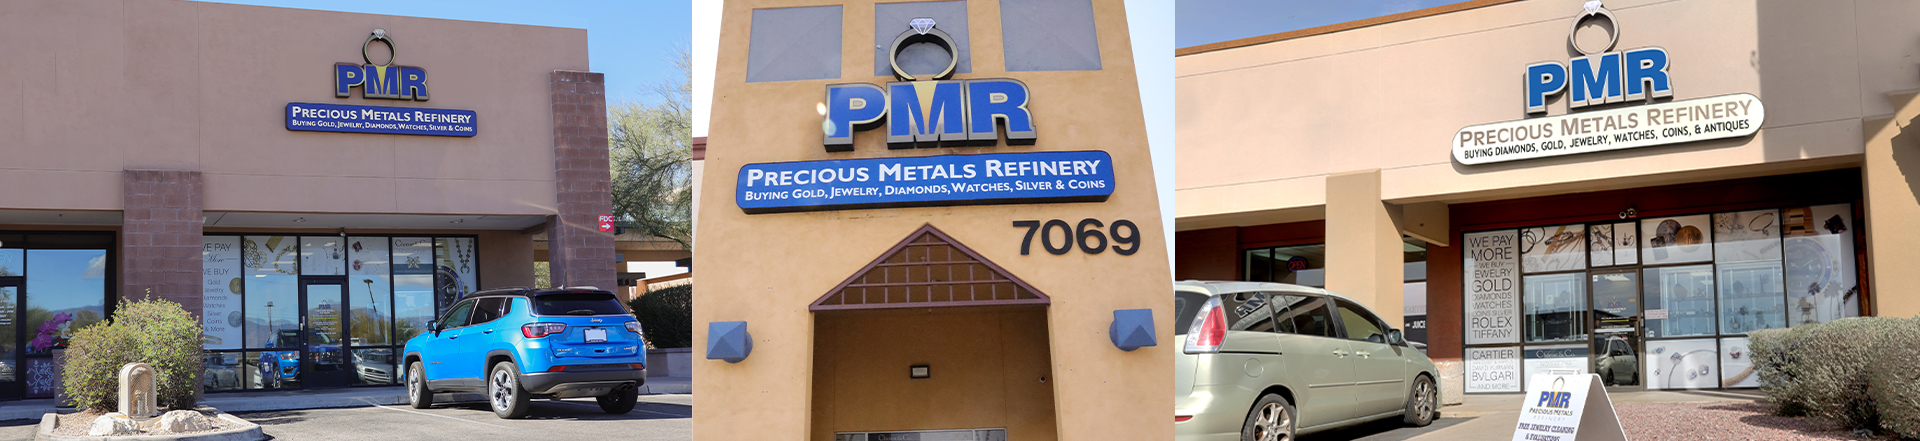 precious metals refinery storefronts banner